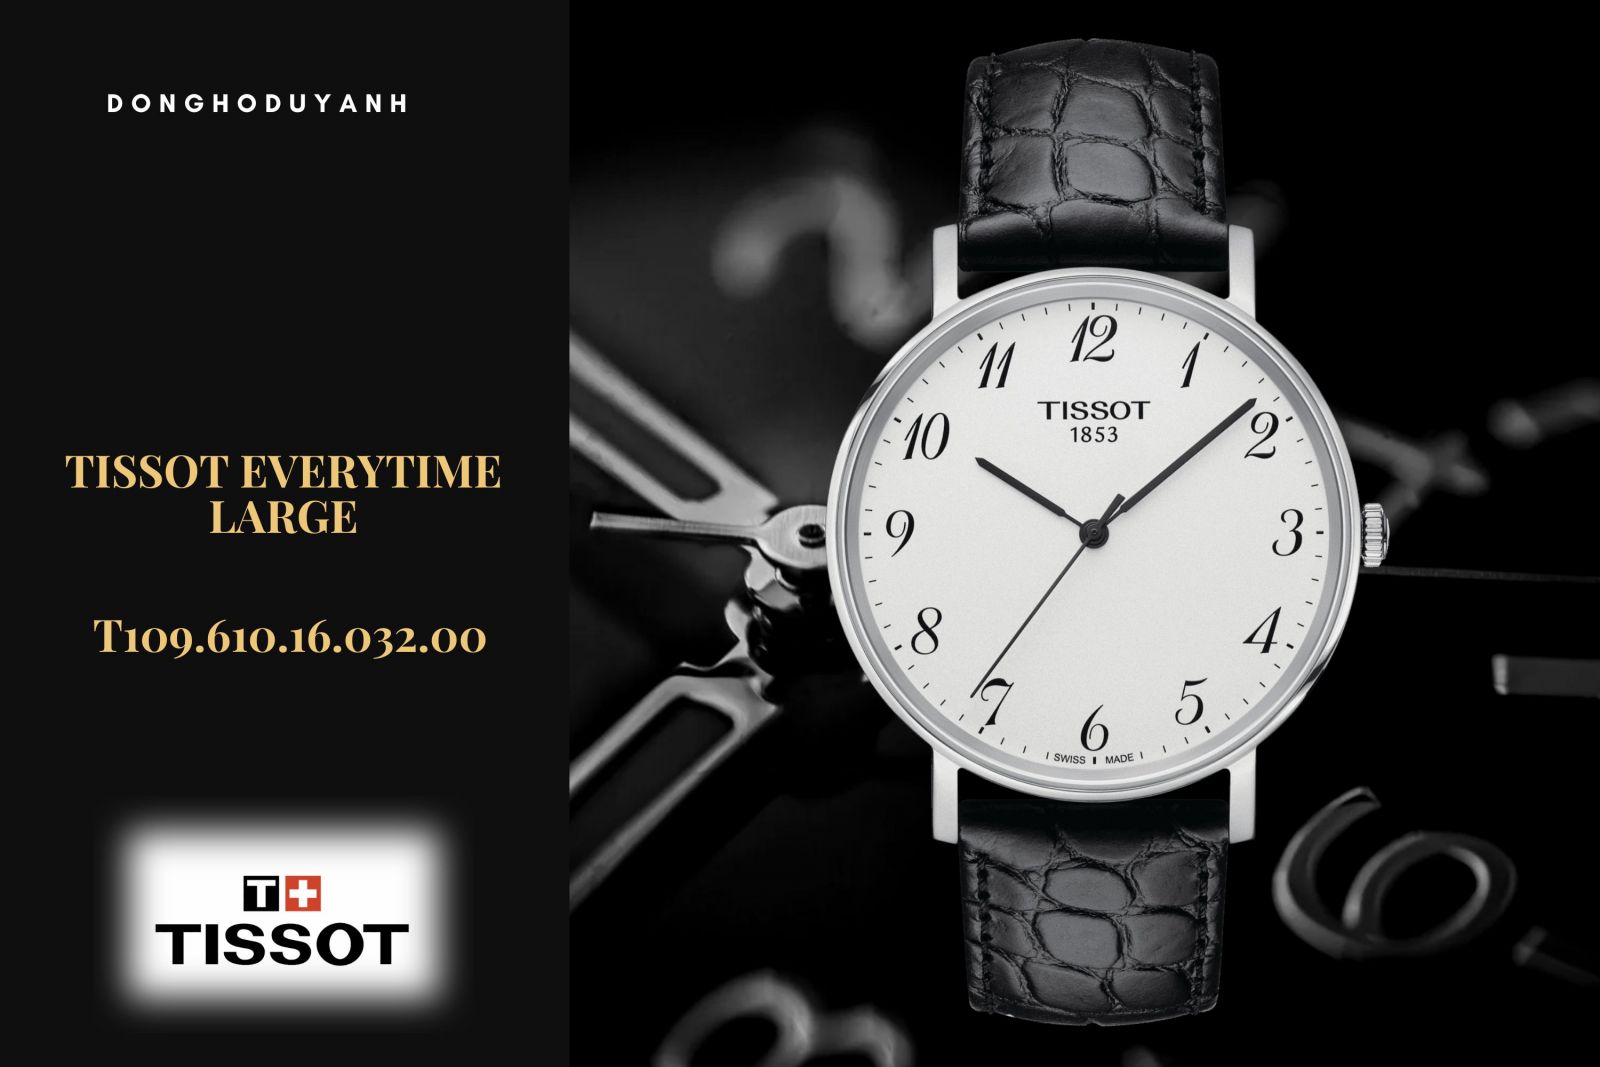 TISSOT EVERYTIME LARGE T109.610.16.032.00